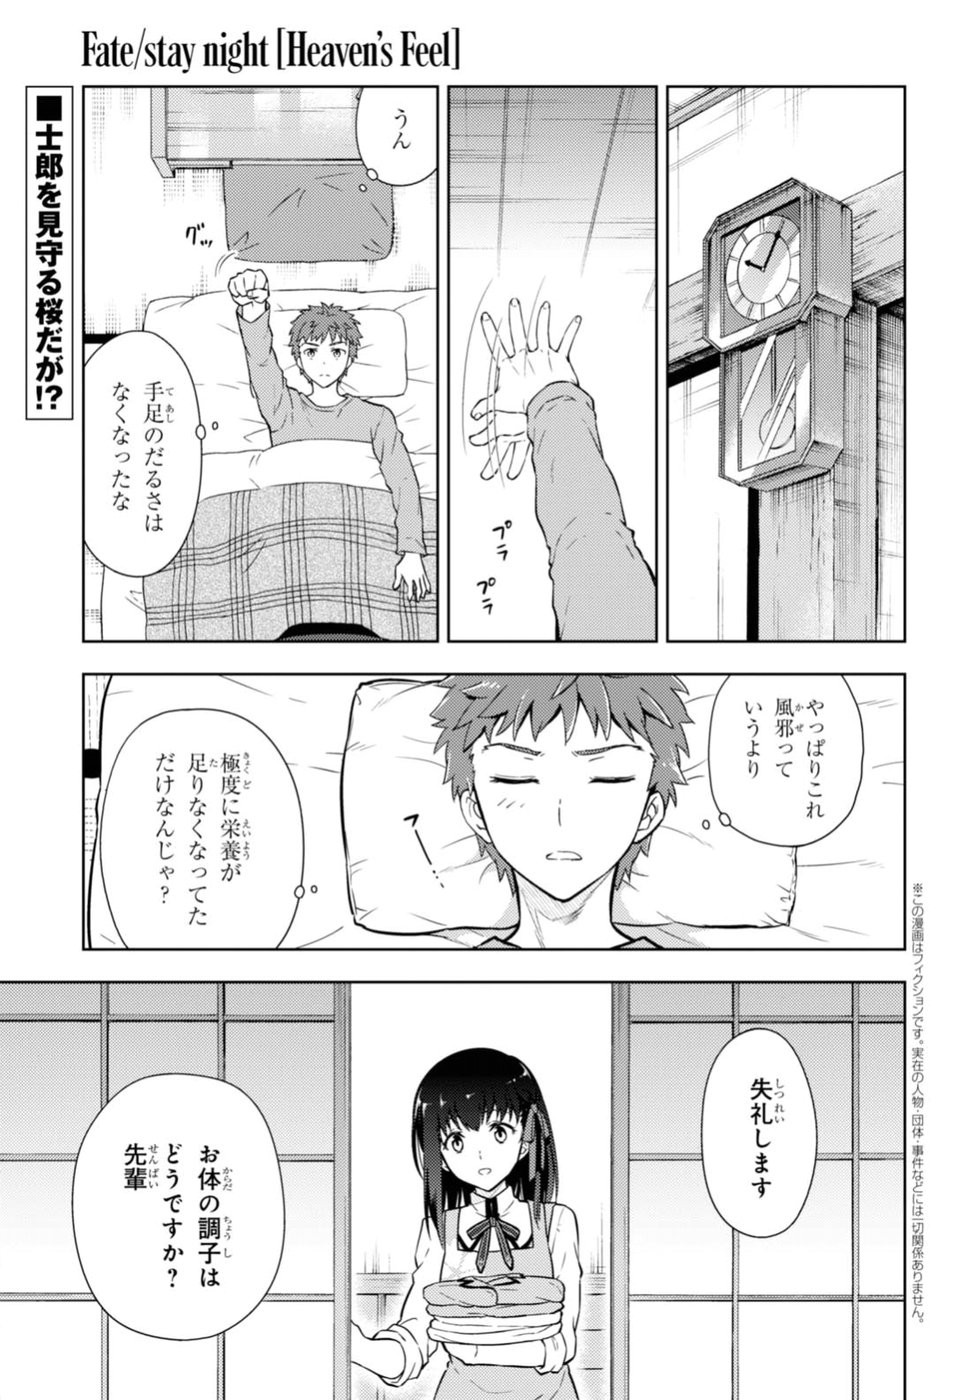 Fate/Stay night Heaven's Feel - Chapter 33 - Page 1